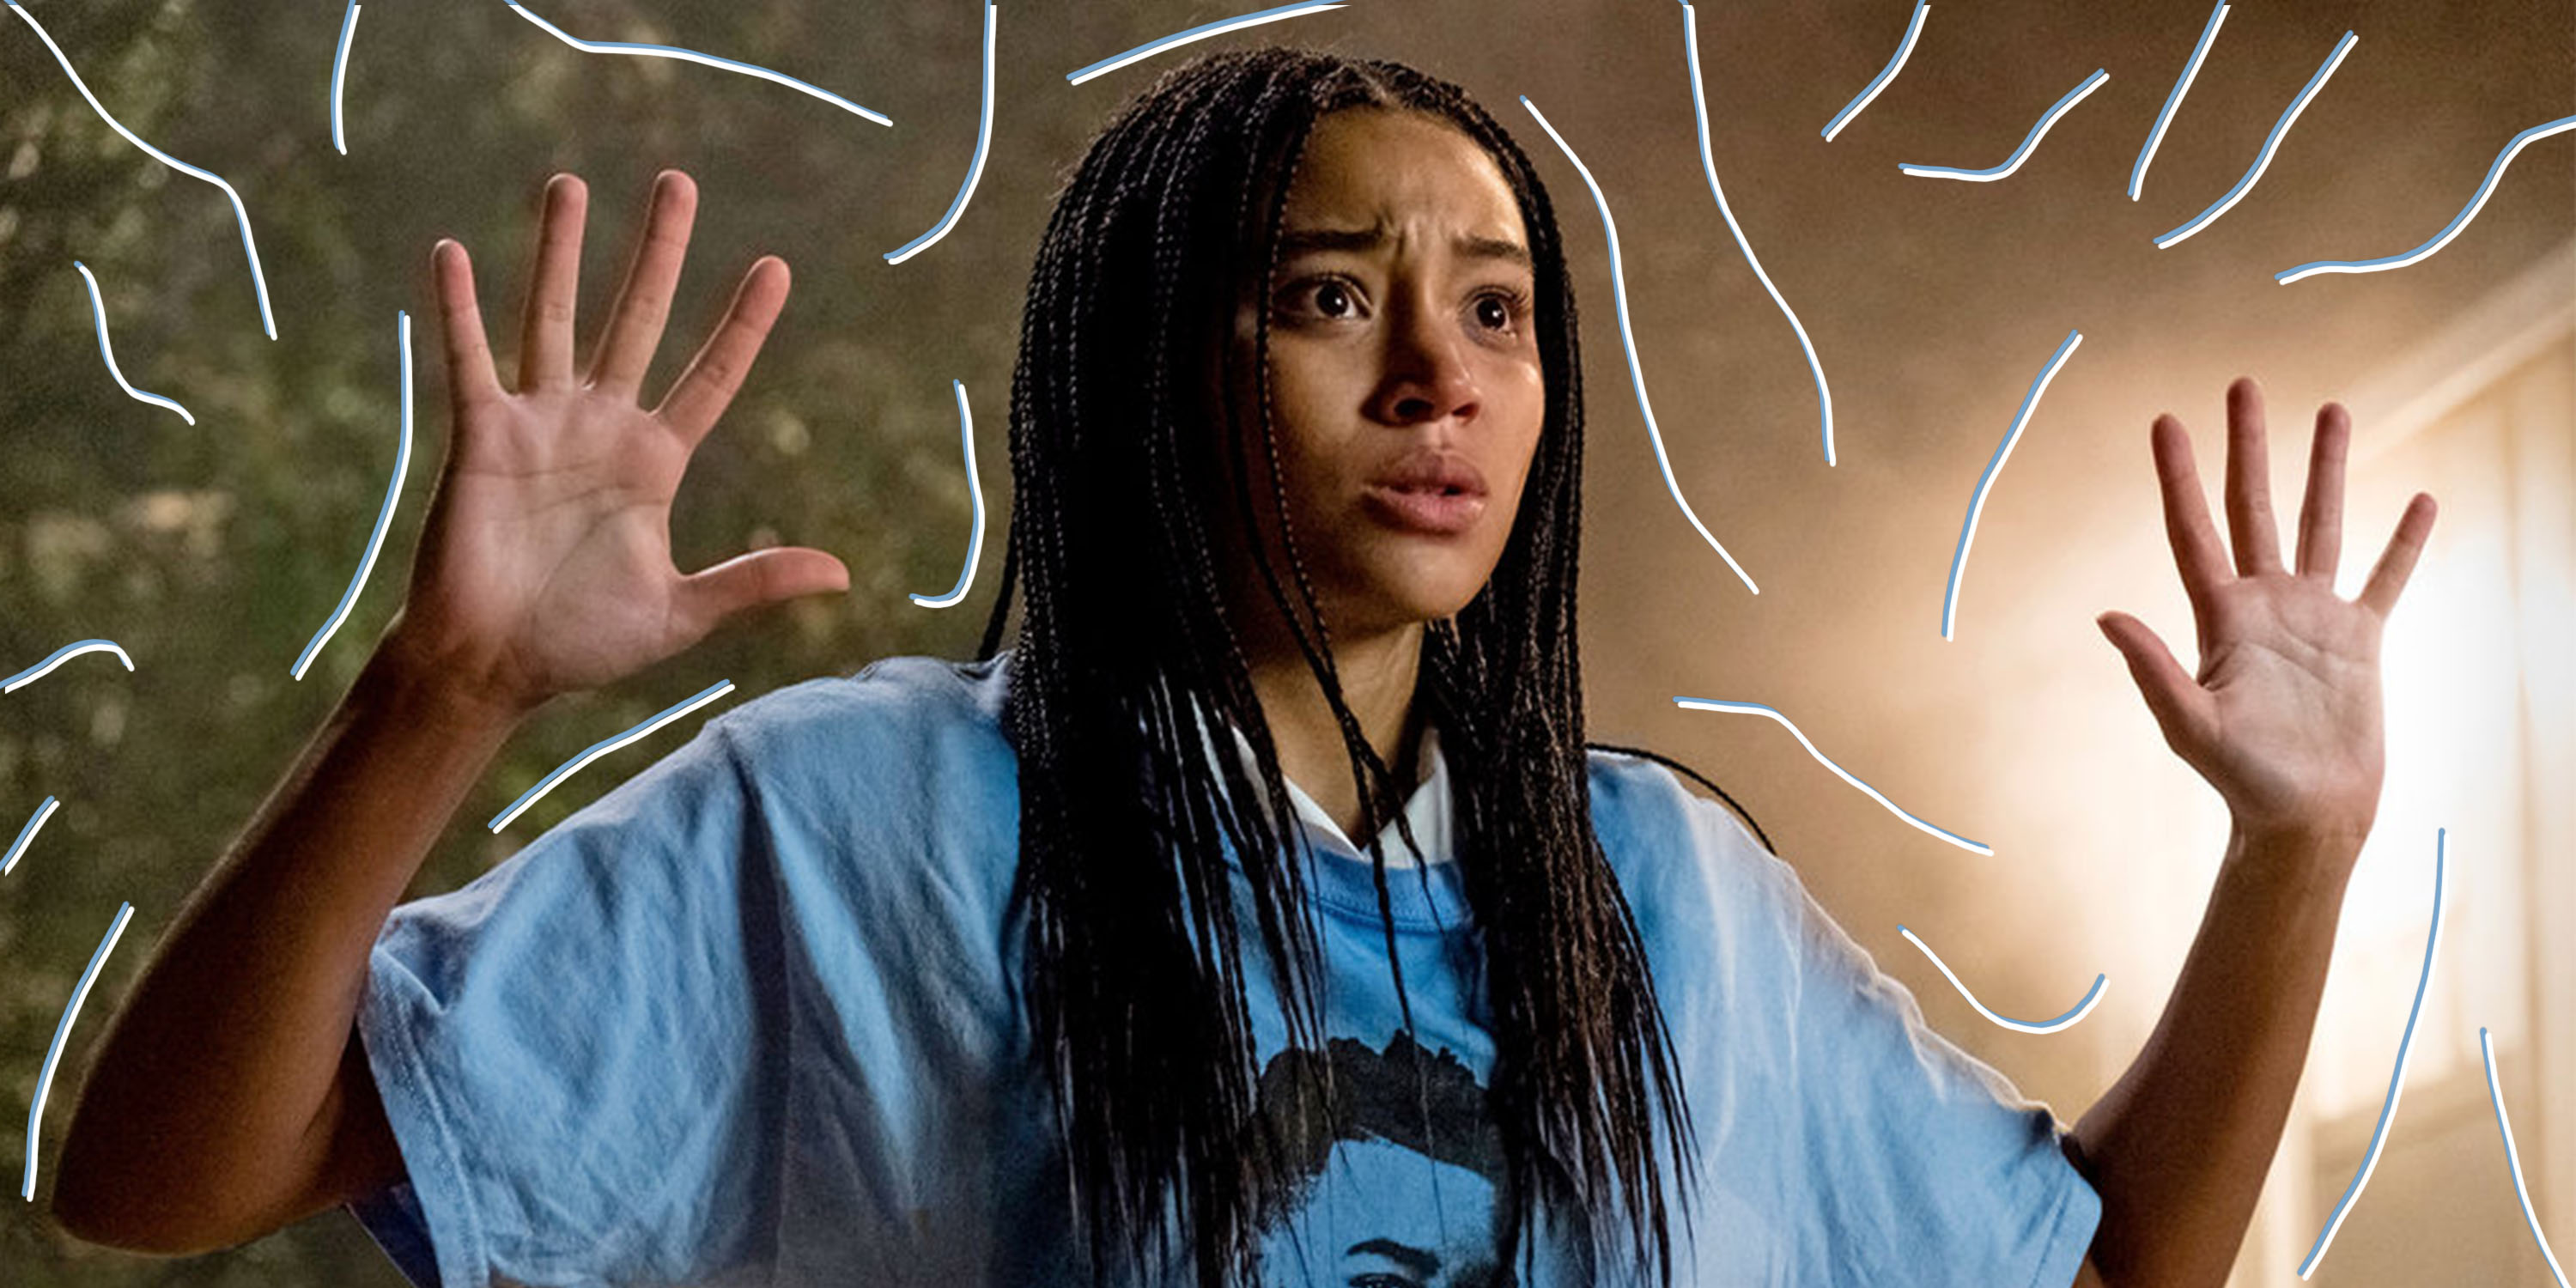 Starr (Amandla Stenberg) holding up her hands with teary eyes signaling "don't shoot."